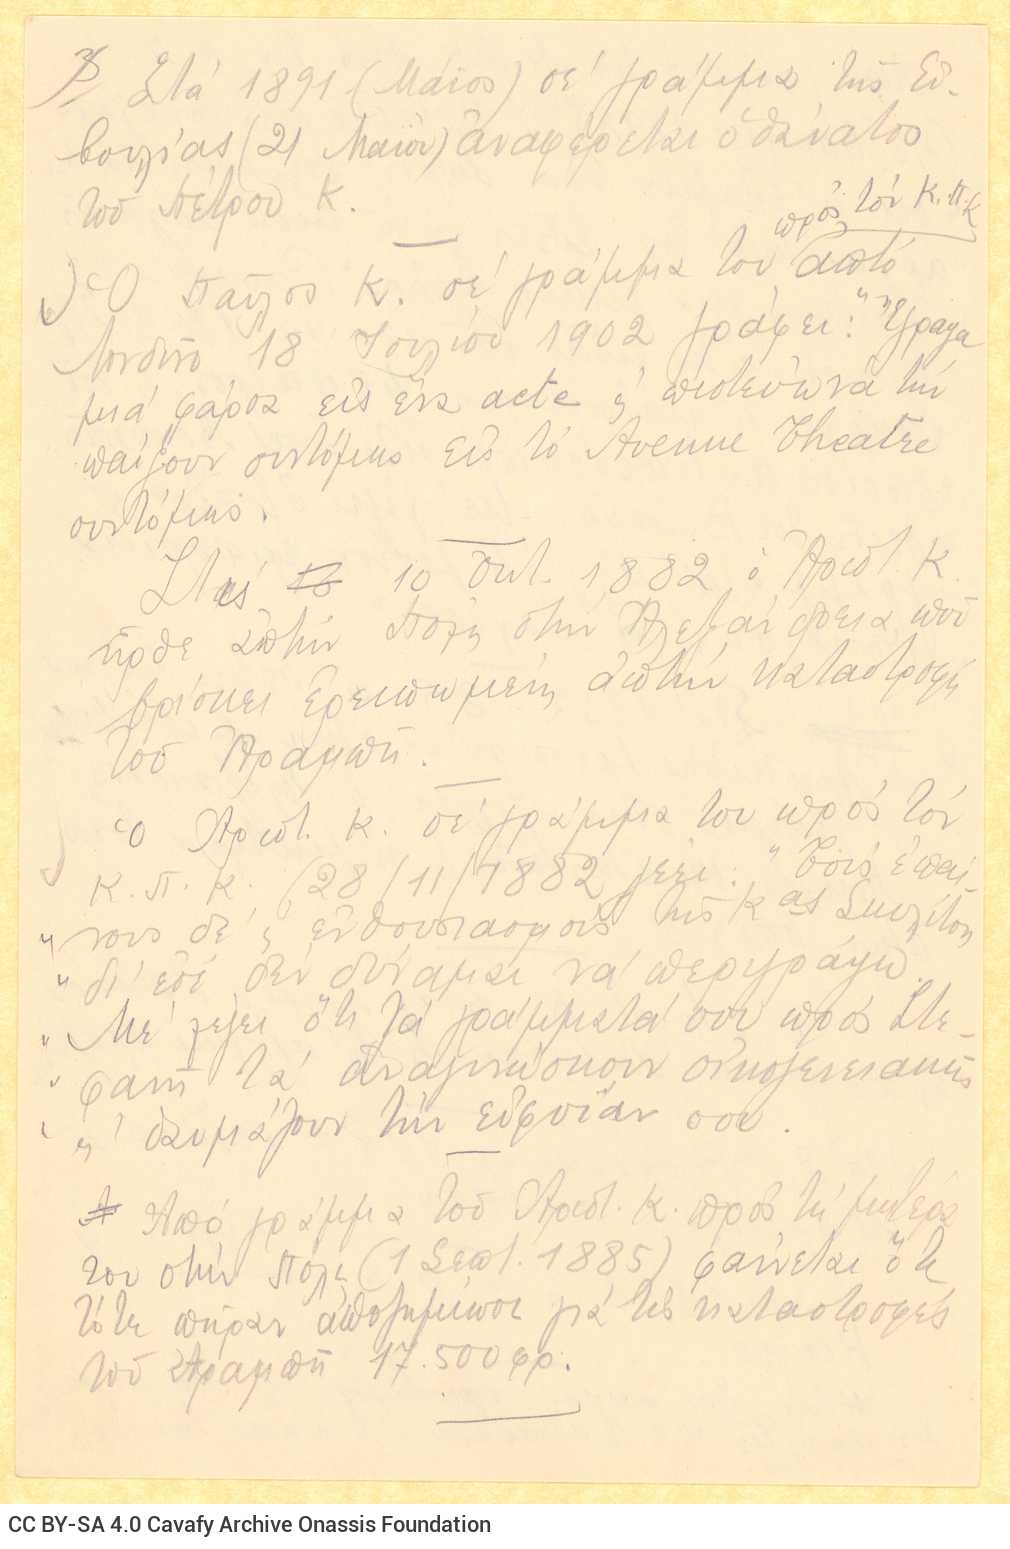 Handwritten notes by Rica Singopoulo on seven sheets and three double sheet notepapers. The notes pertain to Cavafy's life an